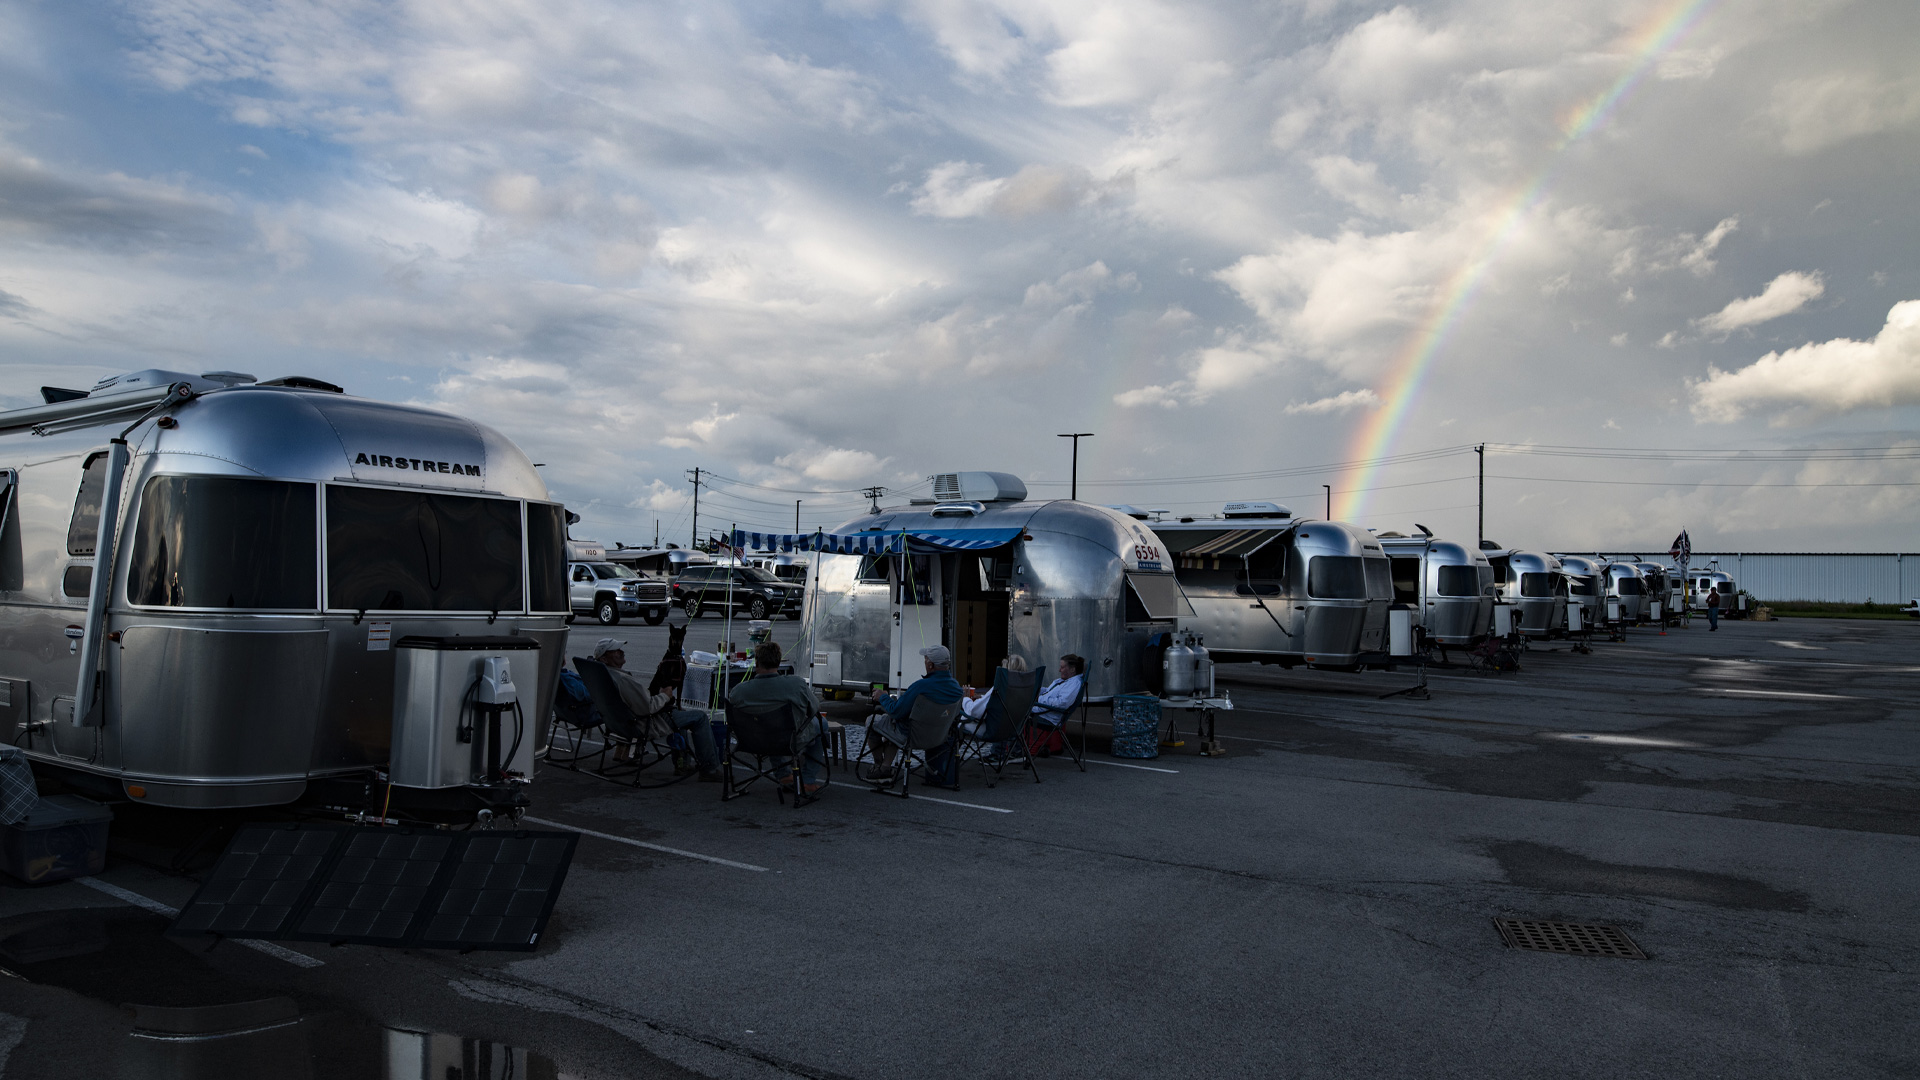 Airstream Travel Trailers parked in a parking lot at Airstream Headquarters in Jackson Center, OH with a rainbow in the sky.